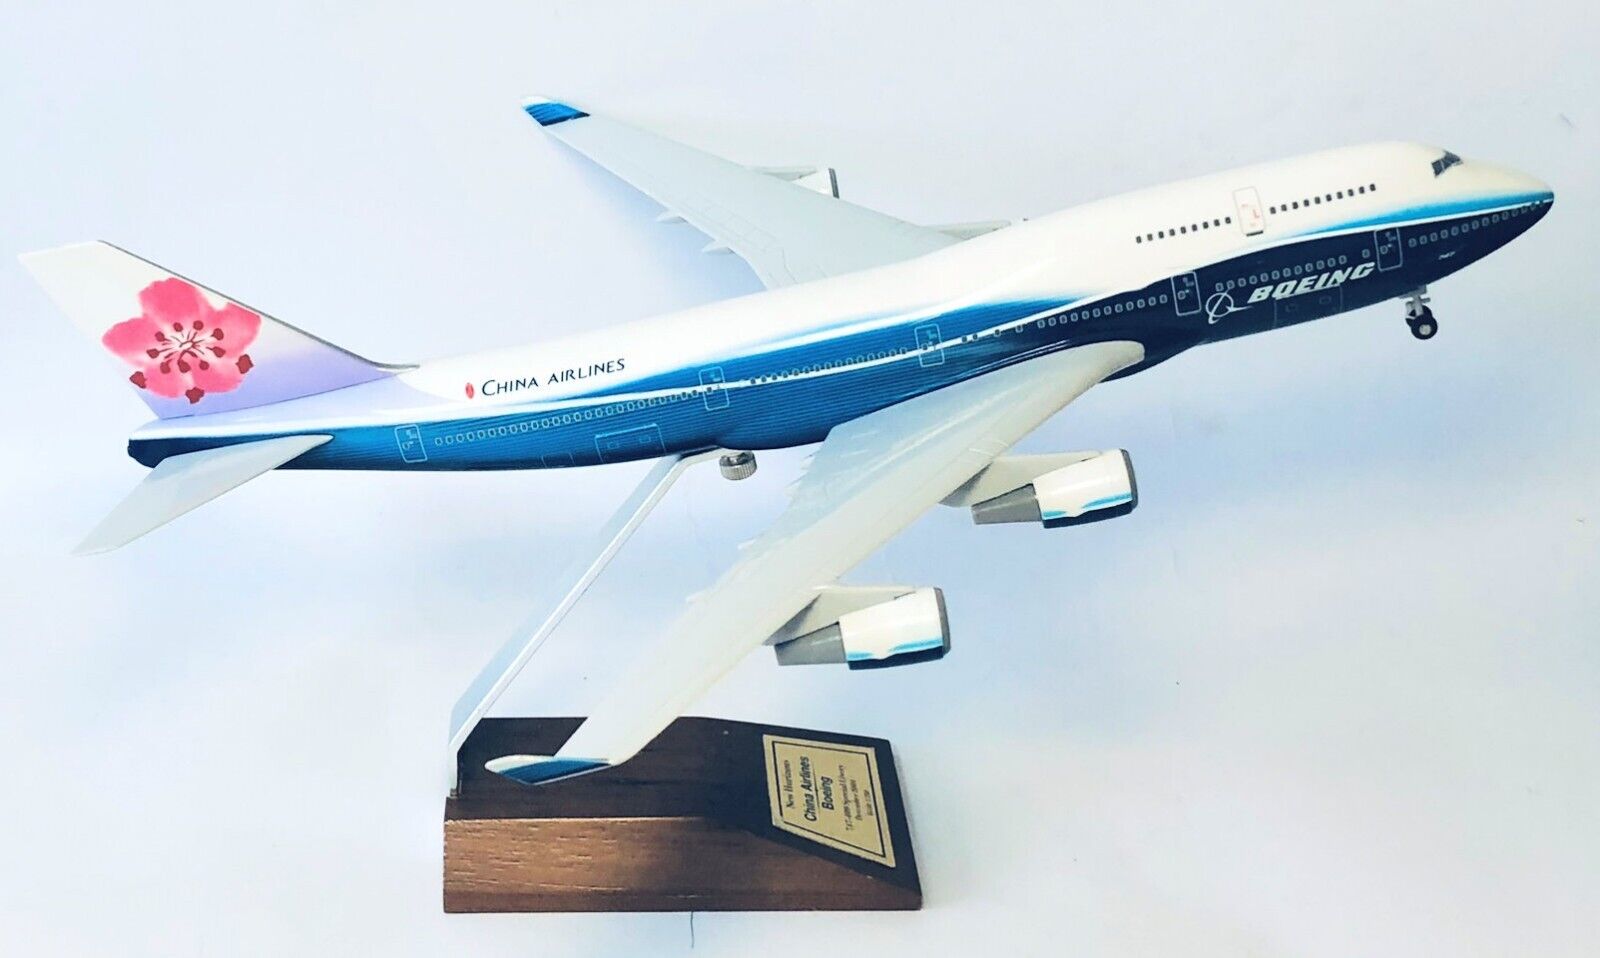 Boeing 747-400 China Airlines Risesoon Skymarks Collectors Model Scale 1:200